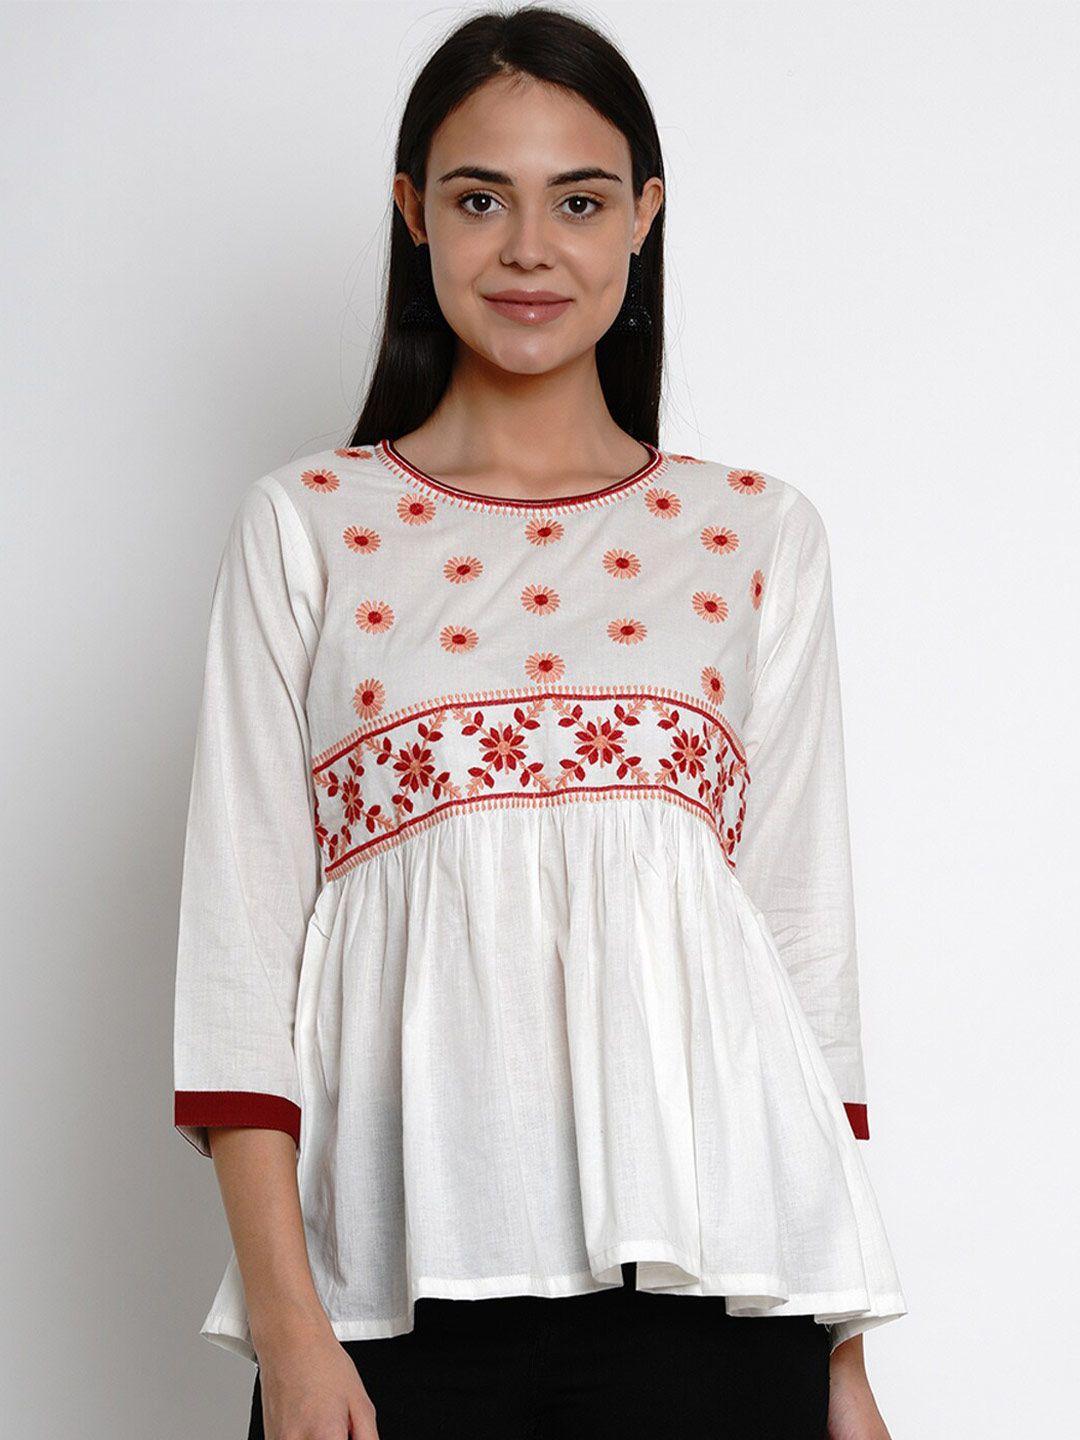 bhama-couture-off-white-floral-embroidered-top